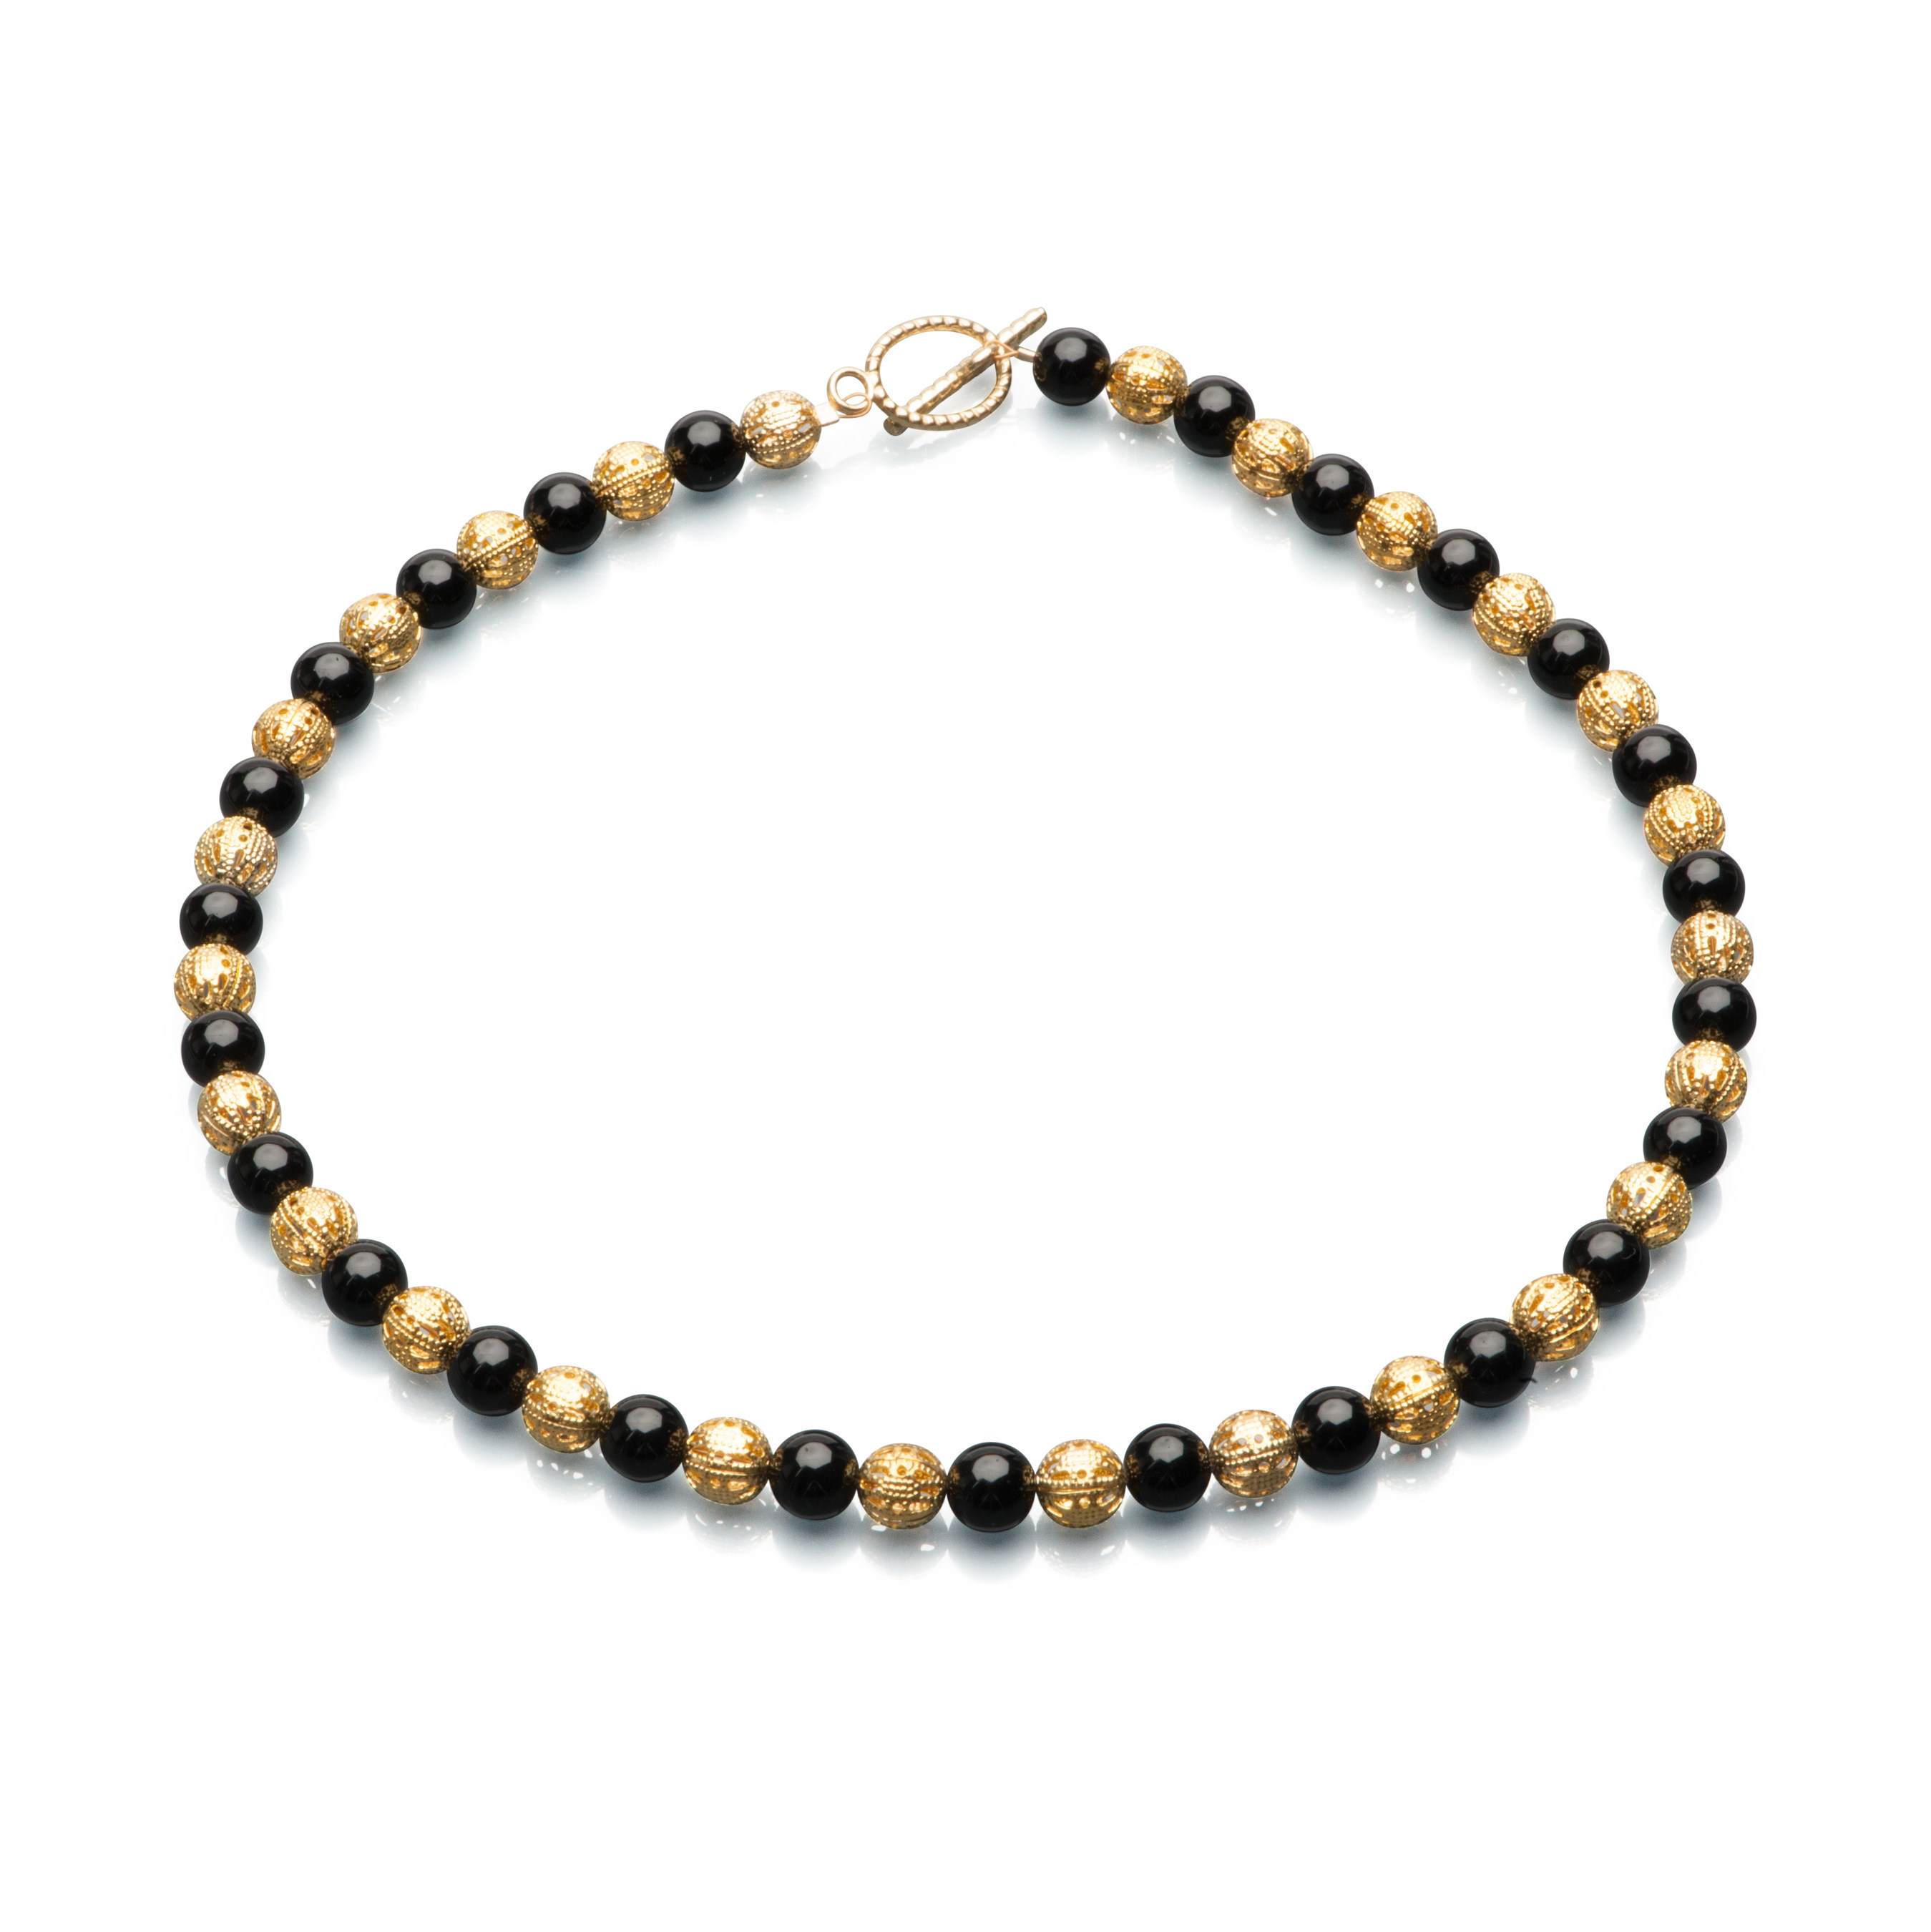 Artistic Falls Black Oness and Gold Tone Bead Necklace